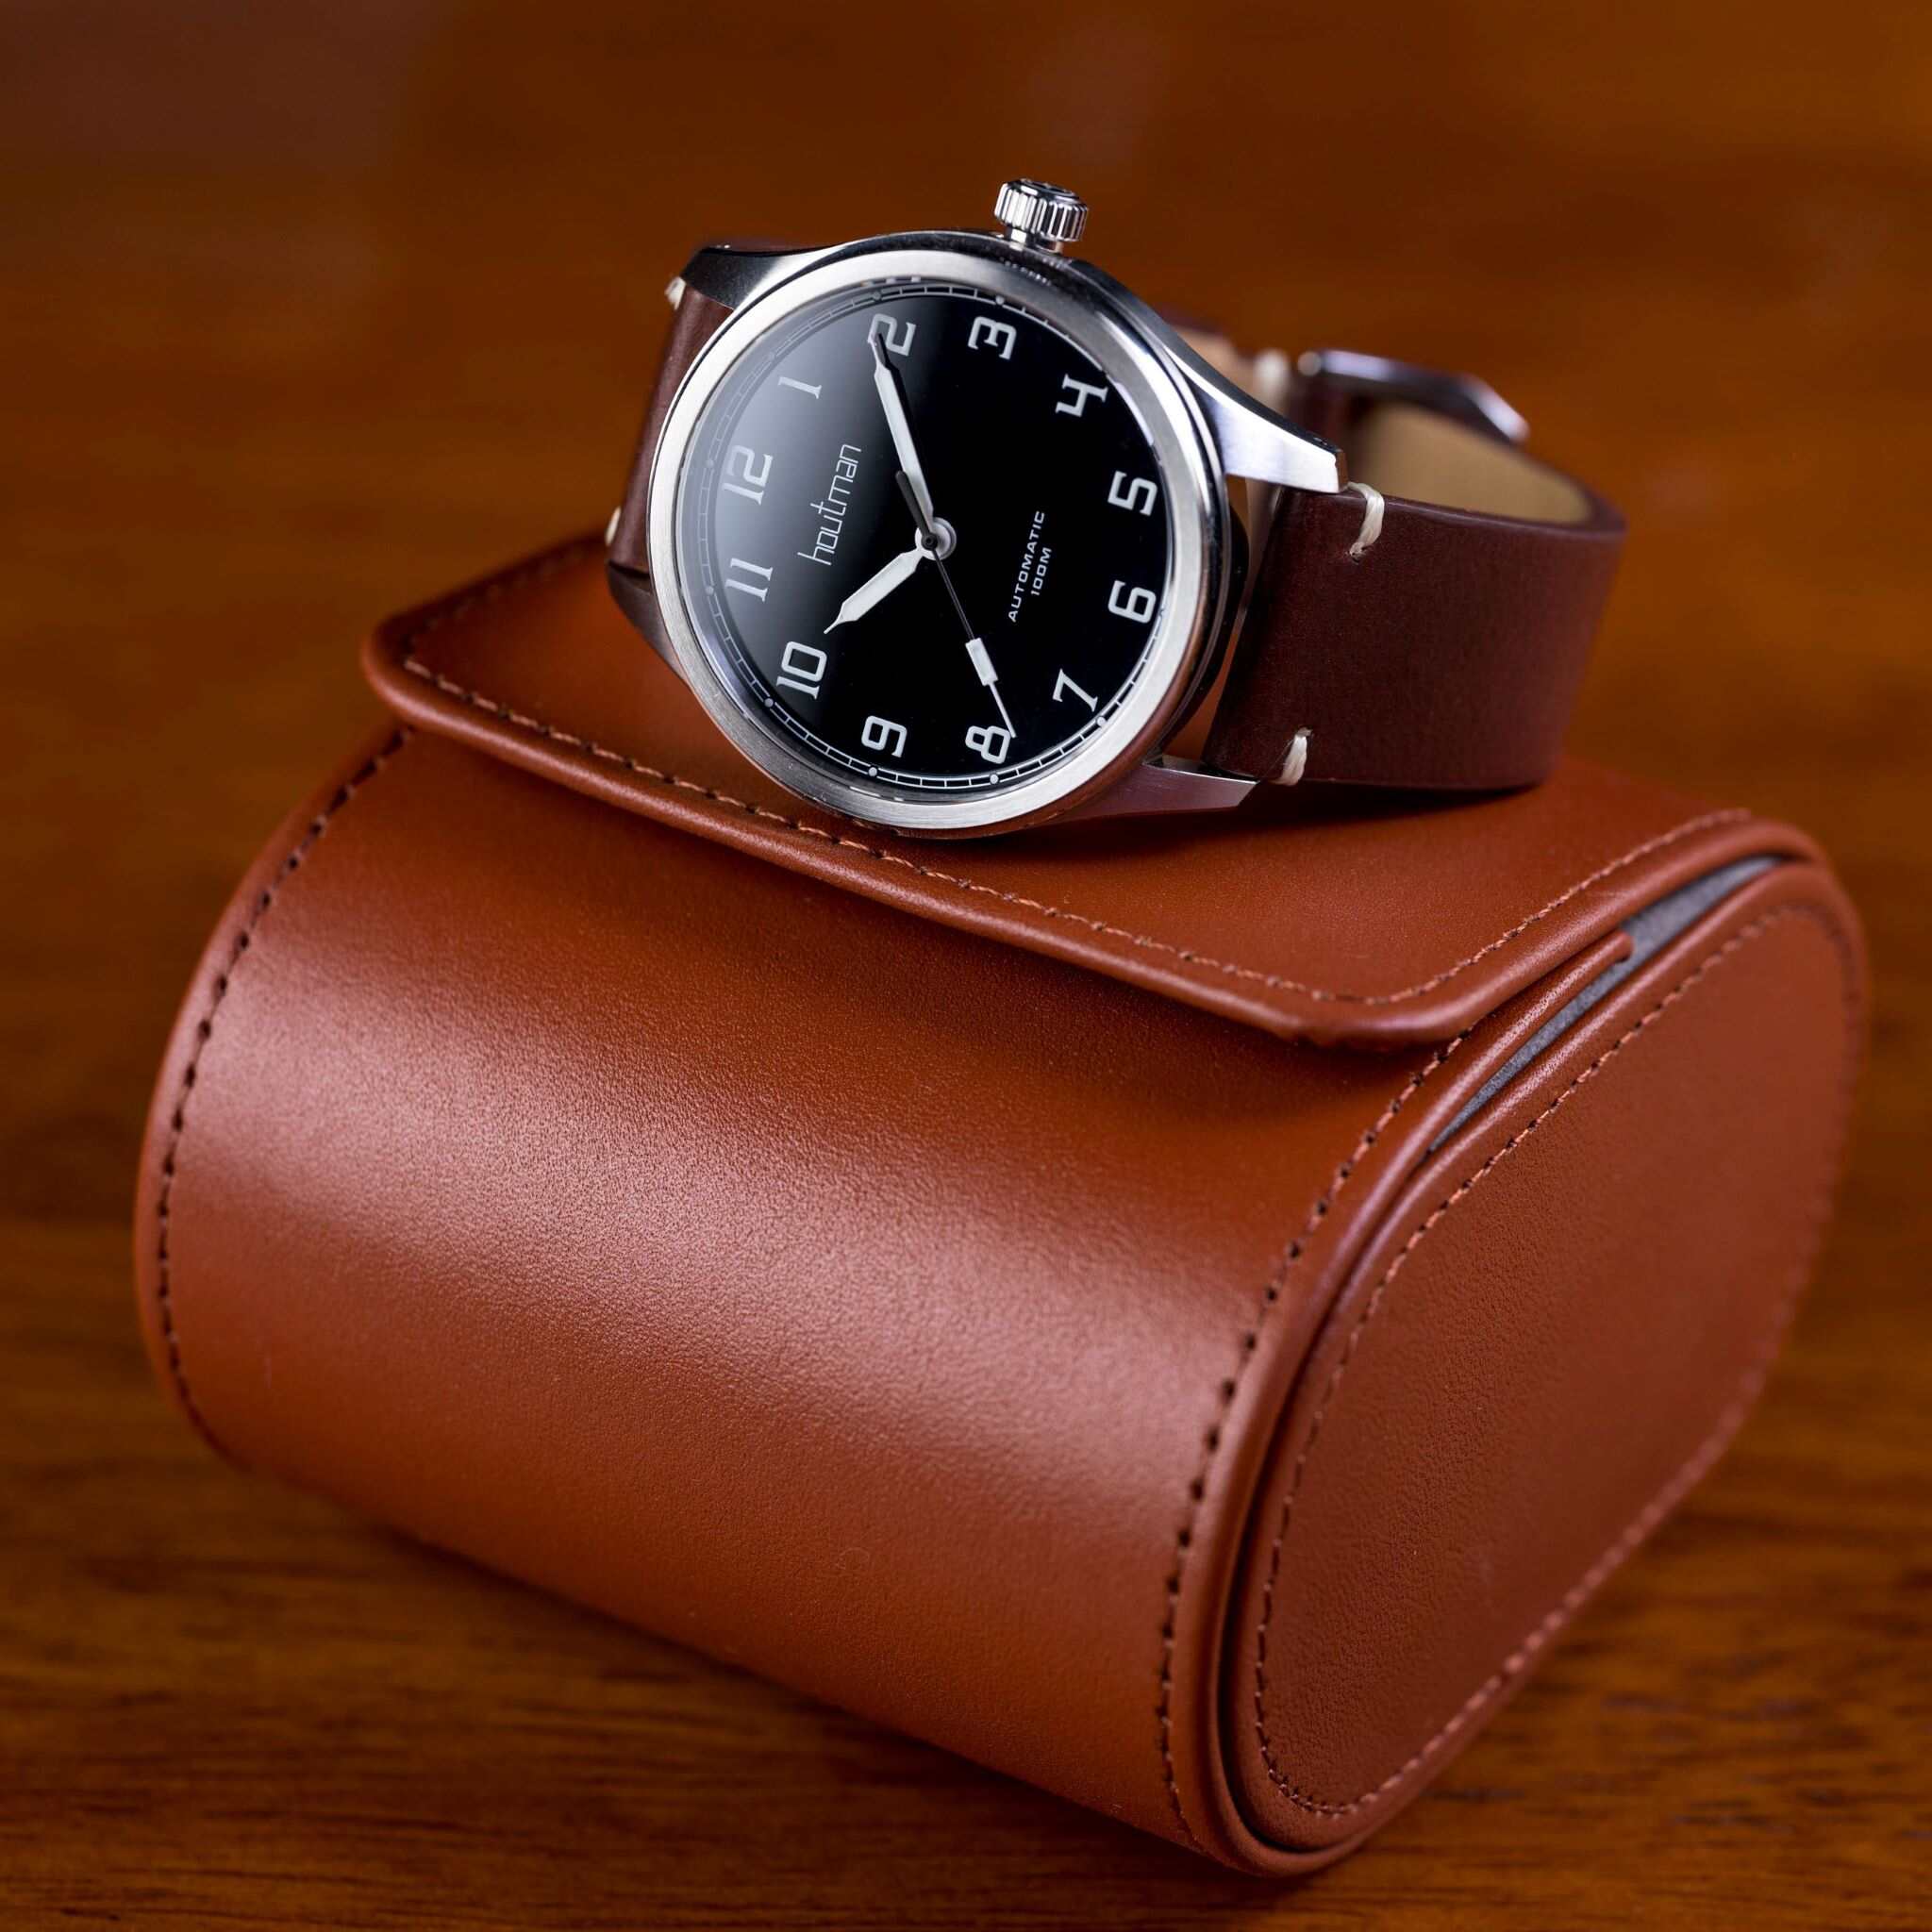 pilot watch with gloss black dial with brown leather strap